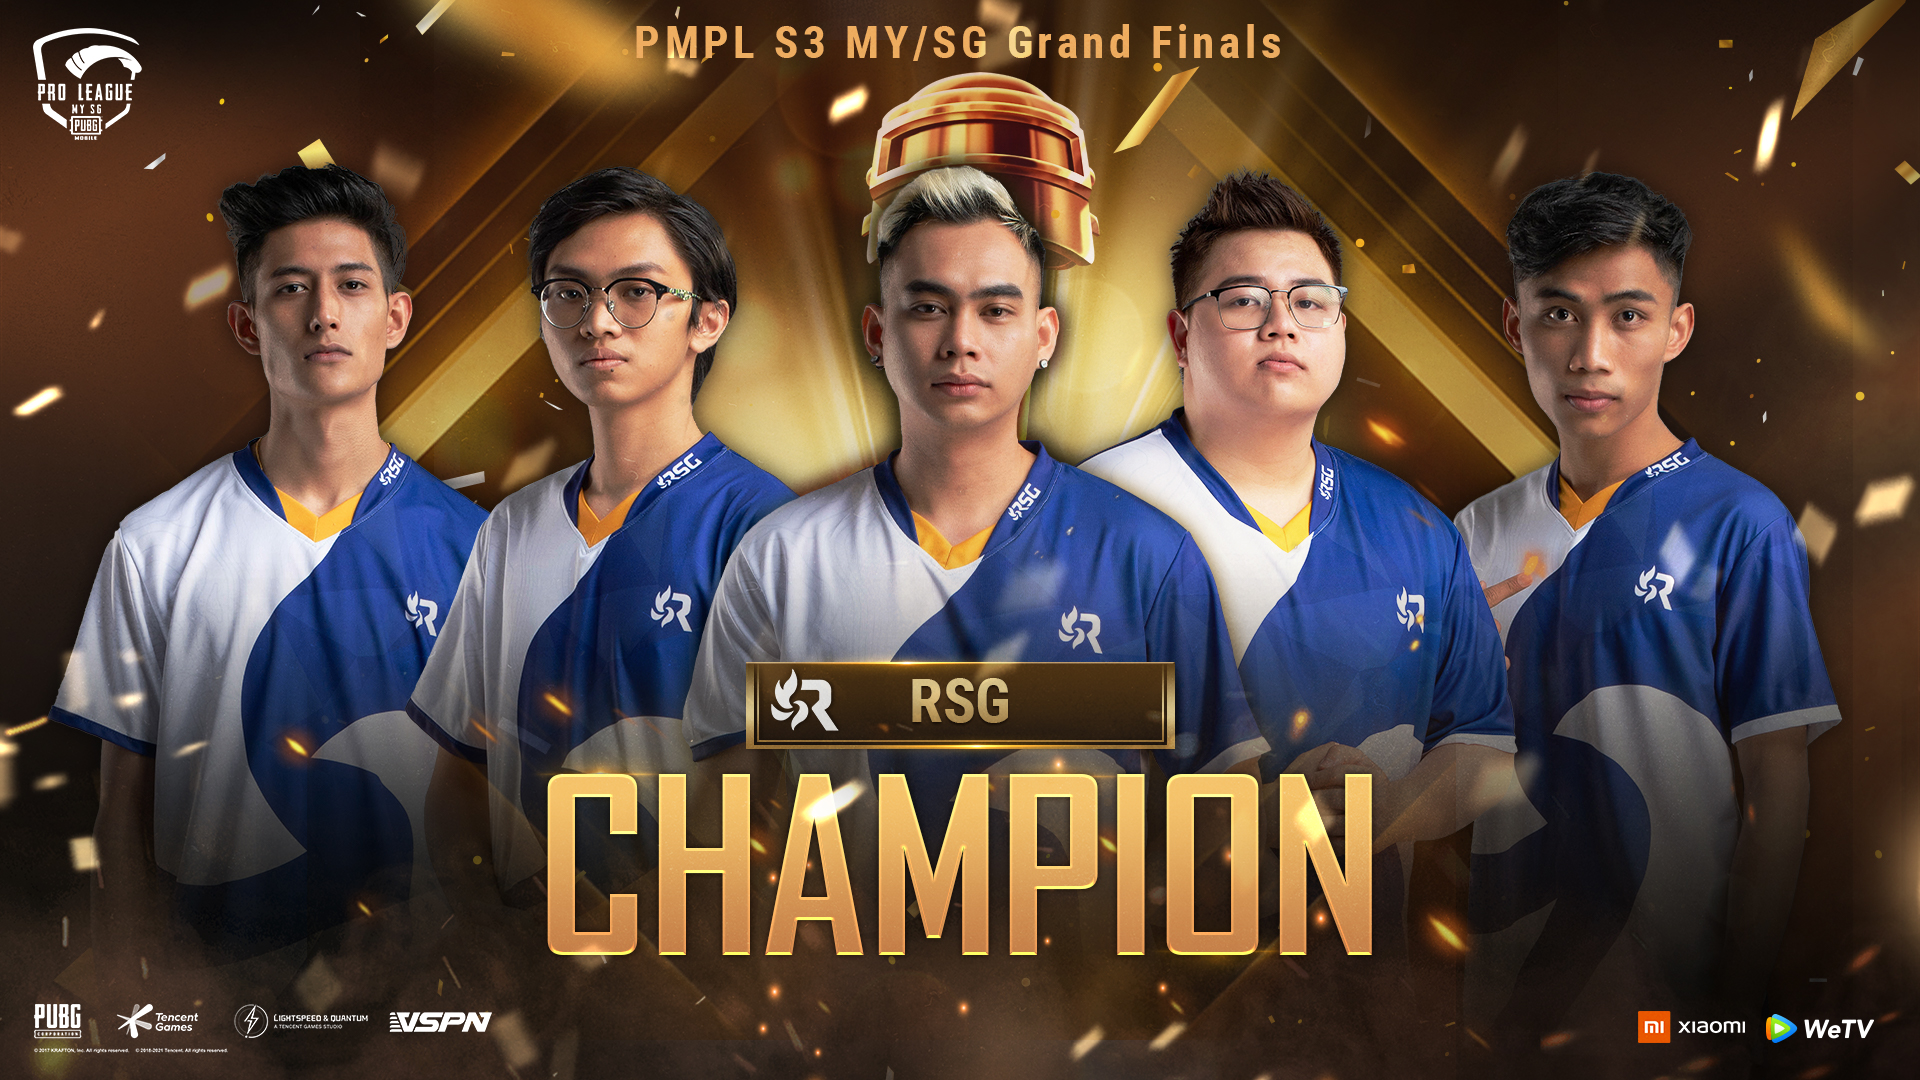 PUBG MOBILE: RSG CROWNED PMPL SEASON 3 MY/SG CHAMPIONS - The Gaming Company